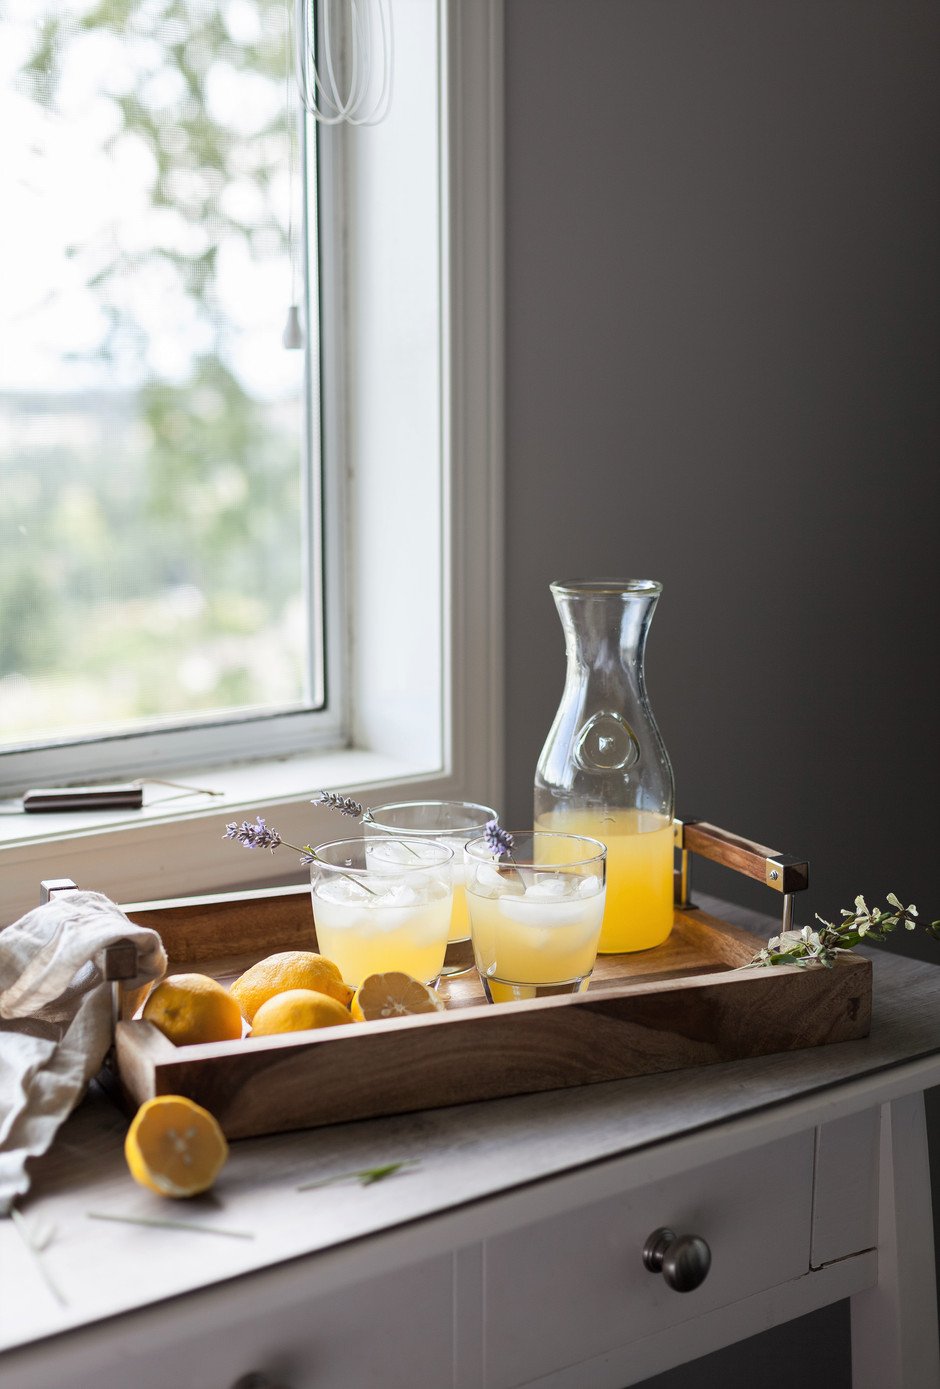 A bottle and glasses of schorle on a tray next to a window with lavender sprigs and lemons. 